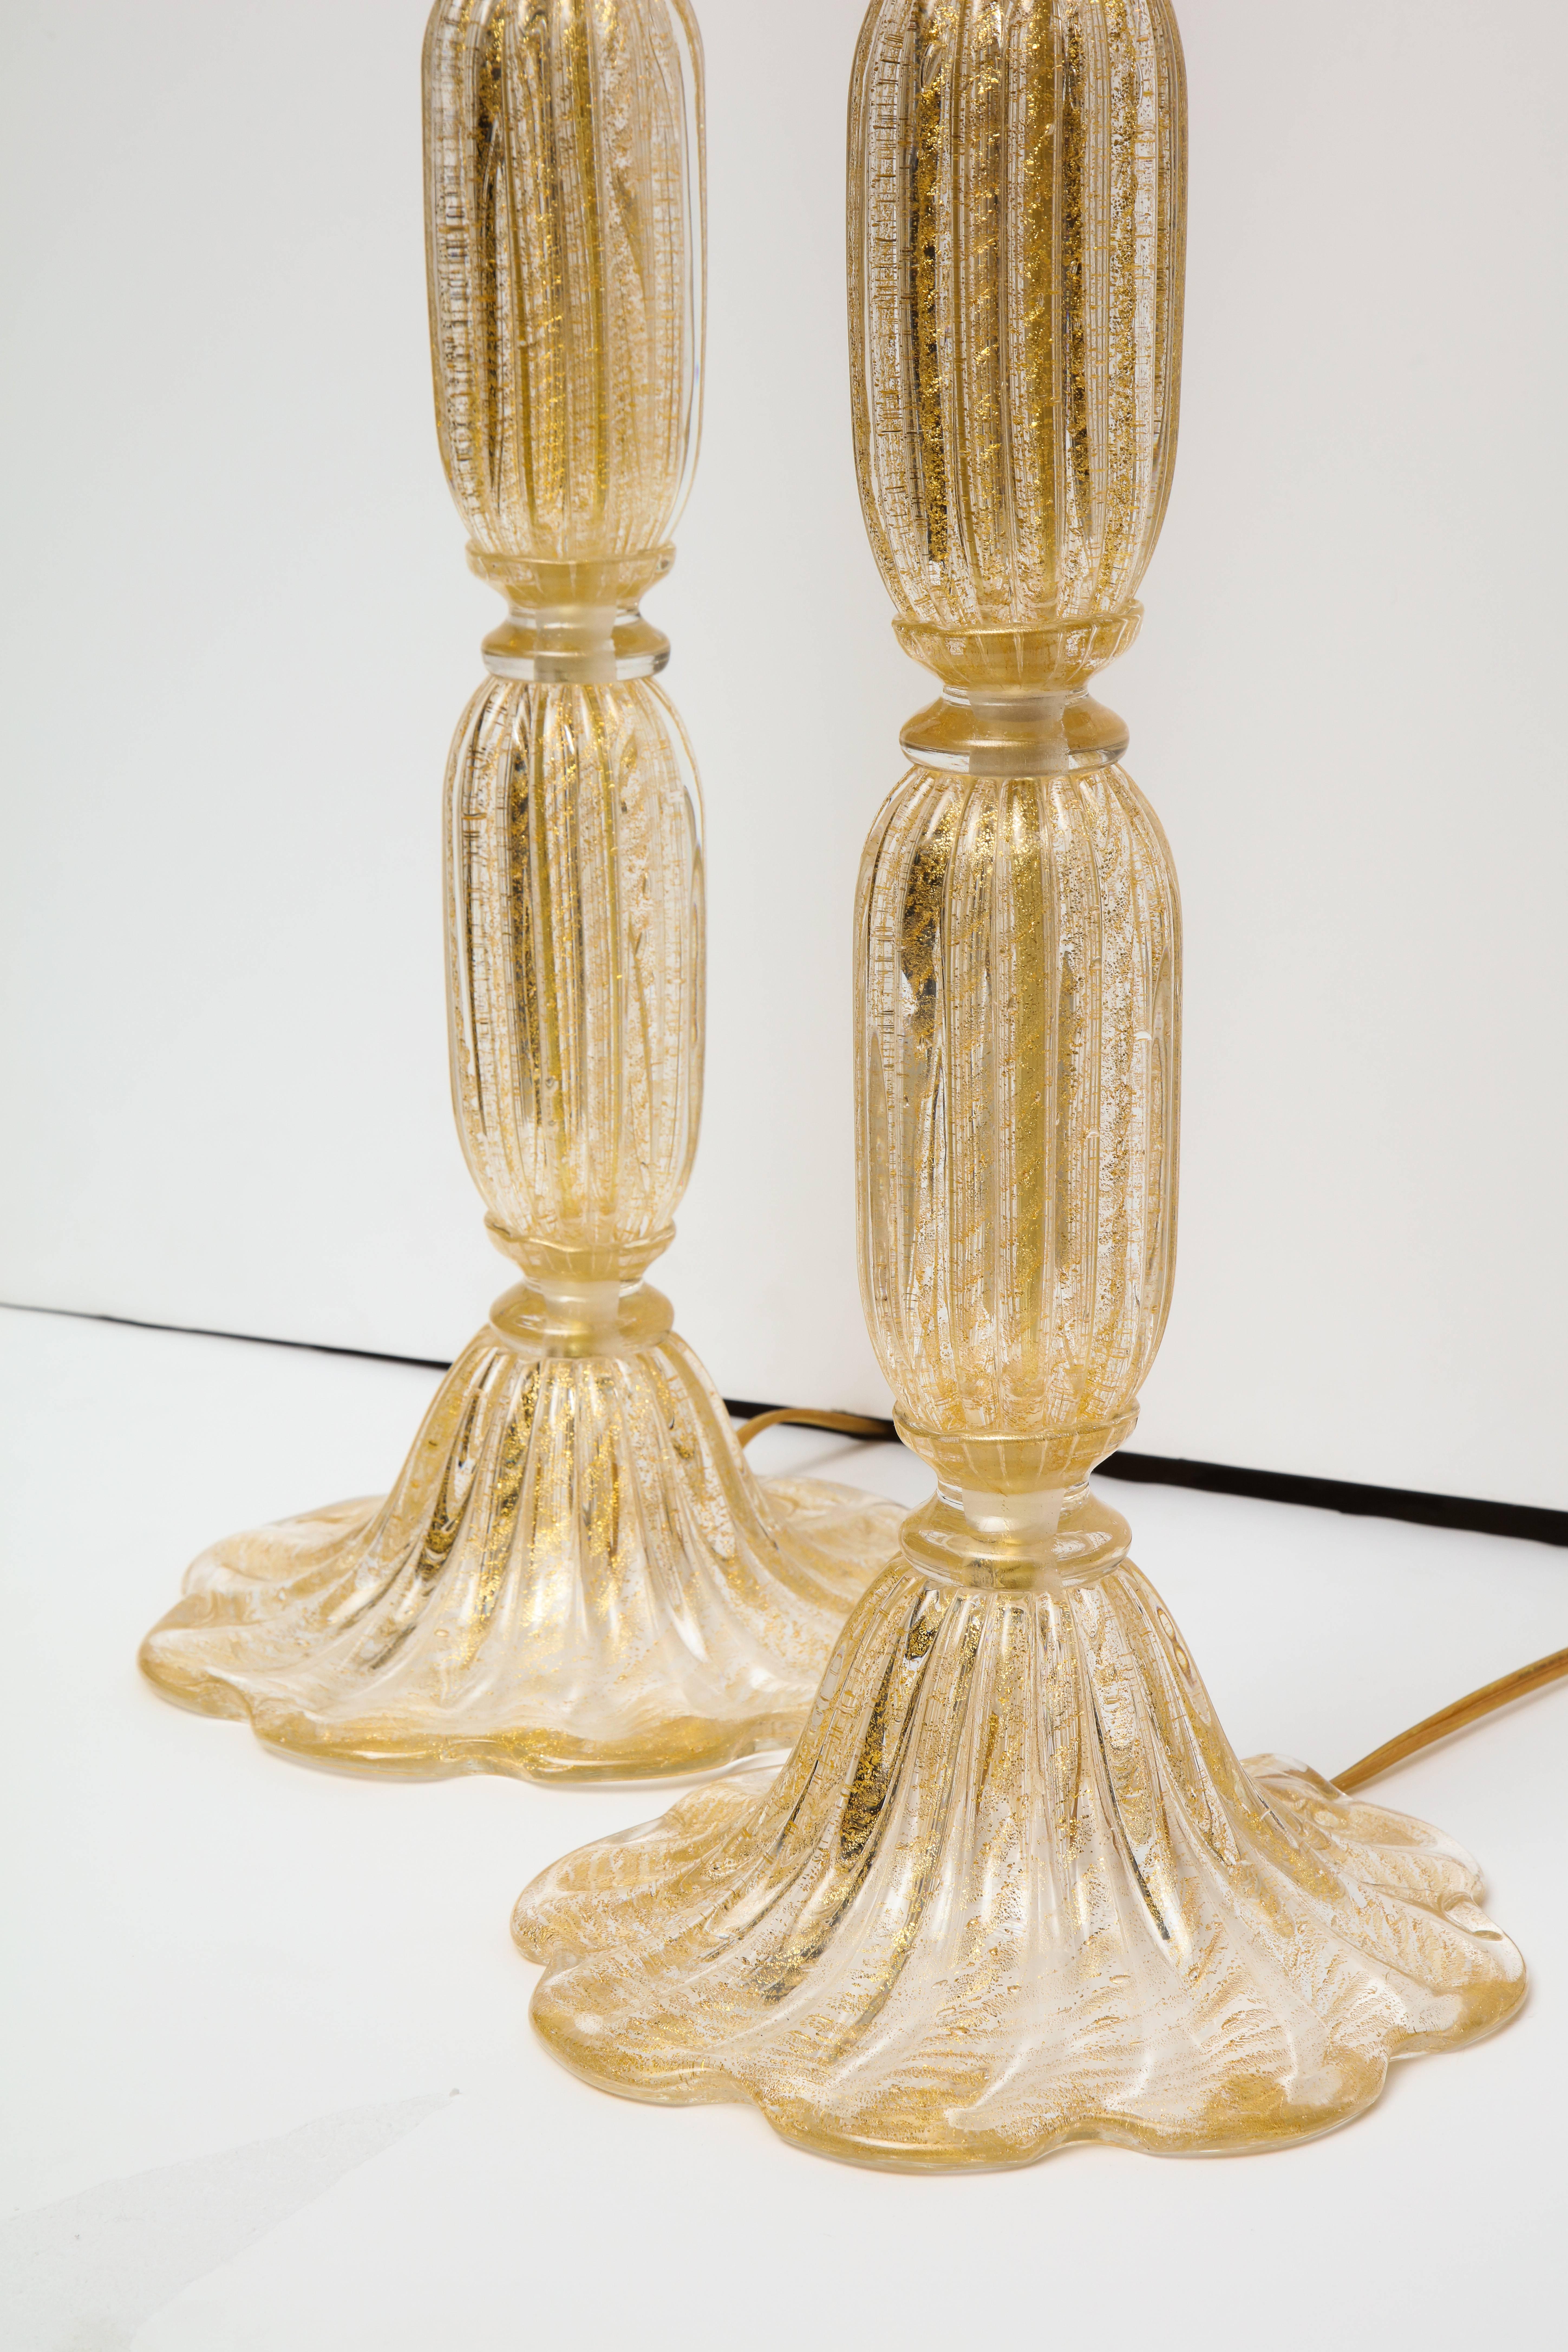 20th Century Tall Pair of Seguso Style 23-Karat Speckled Gold Murano Glass Lamps, Italy